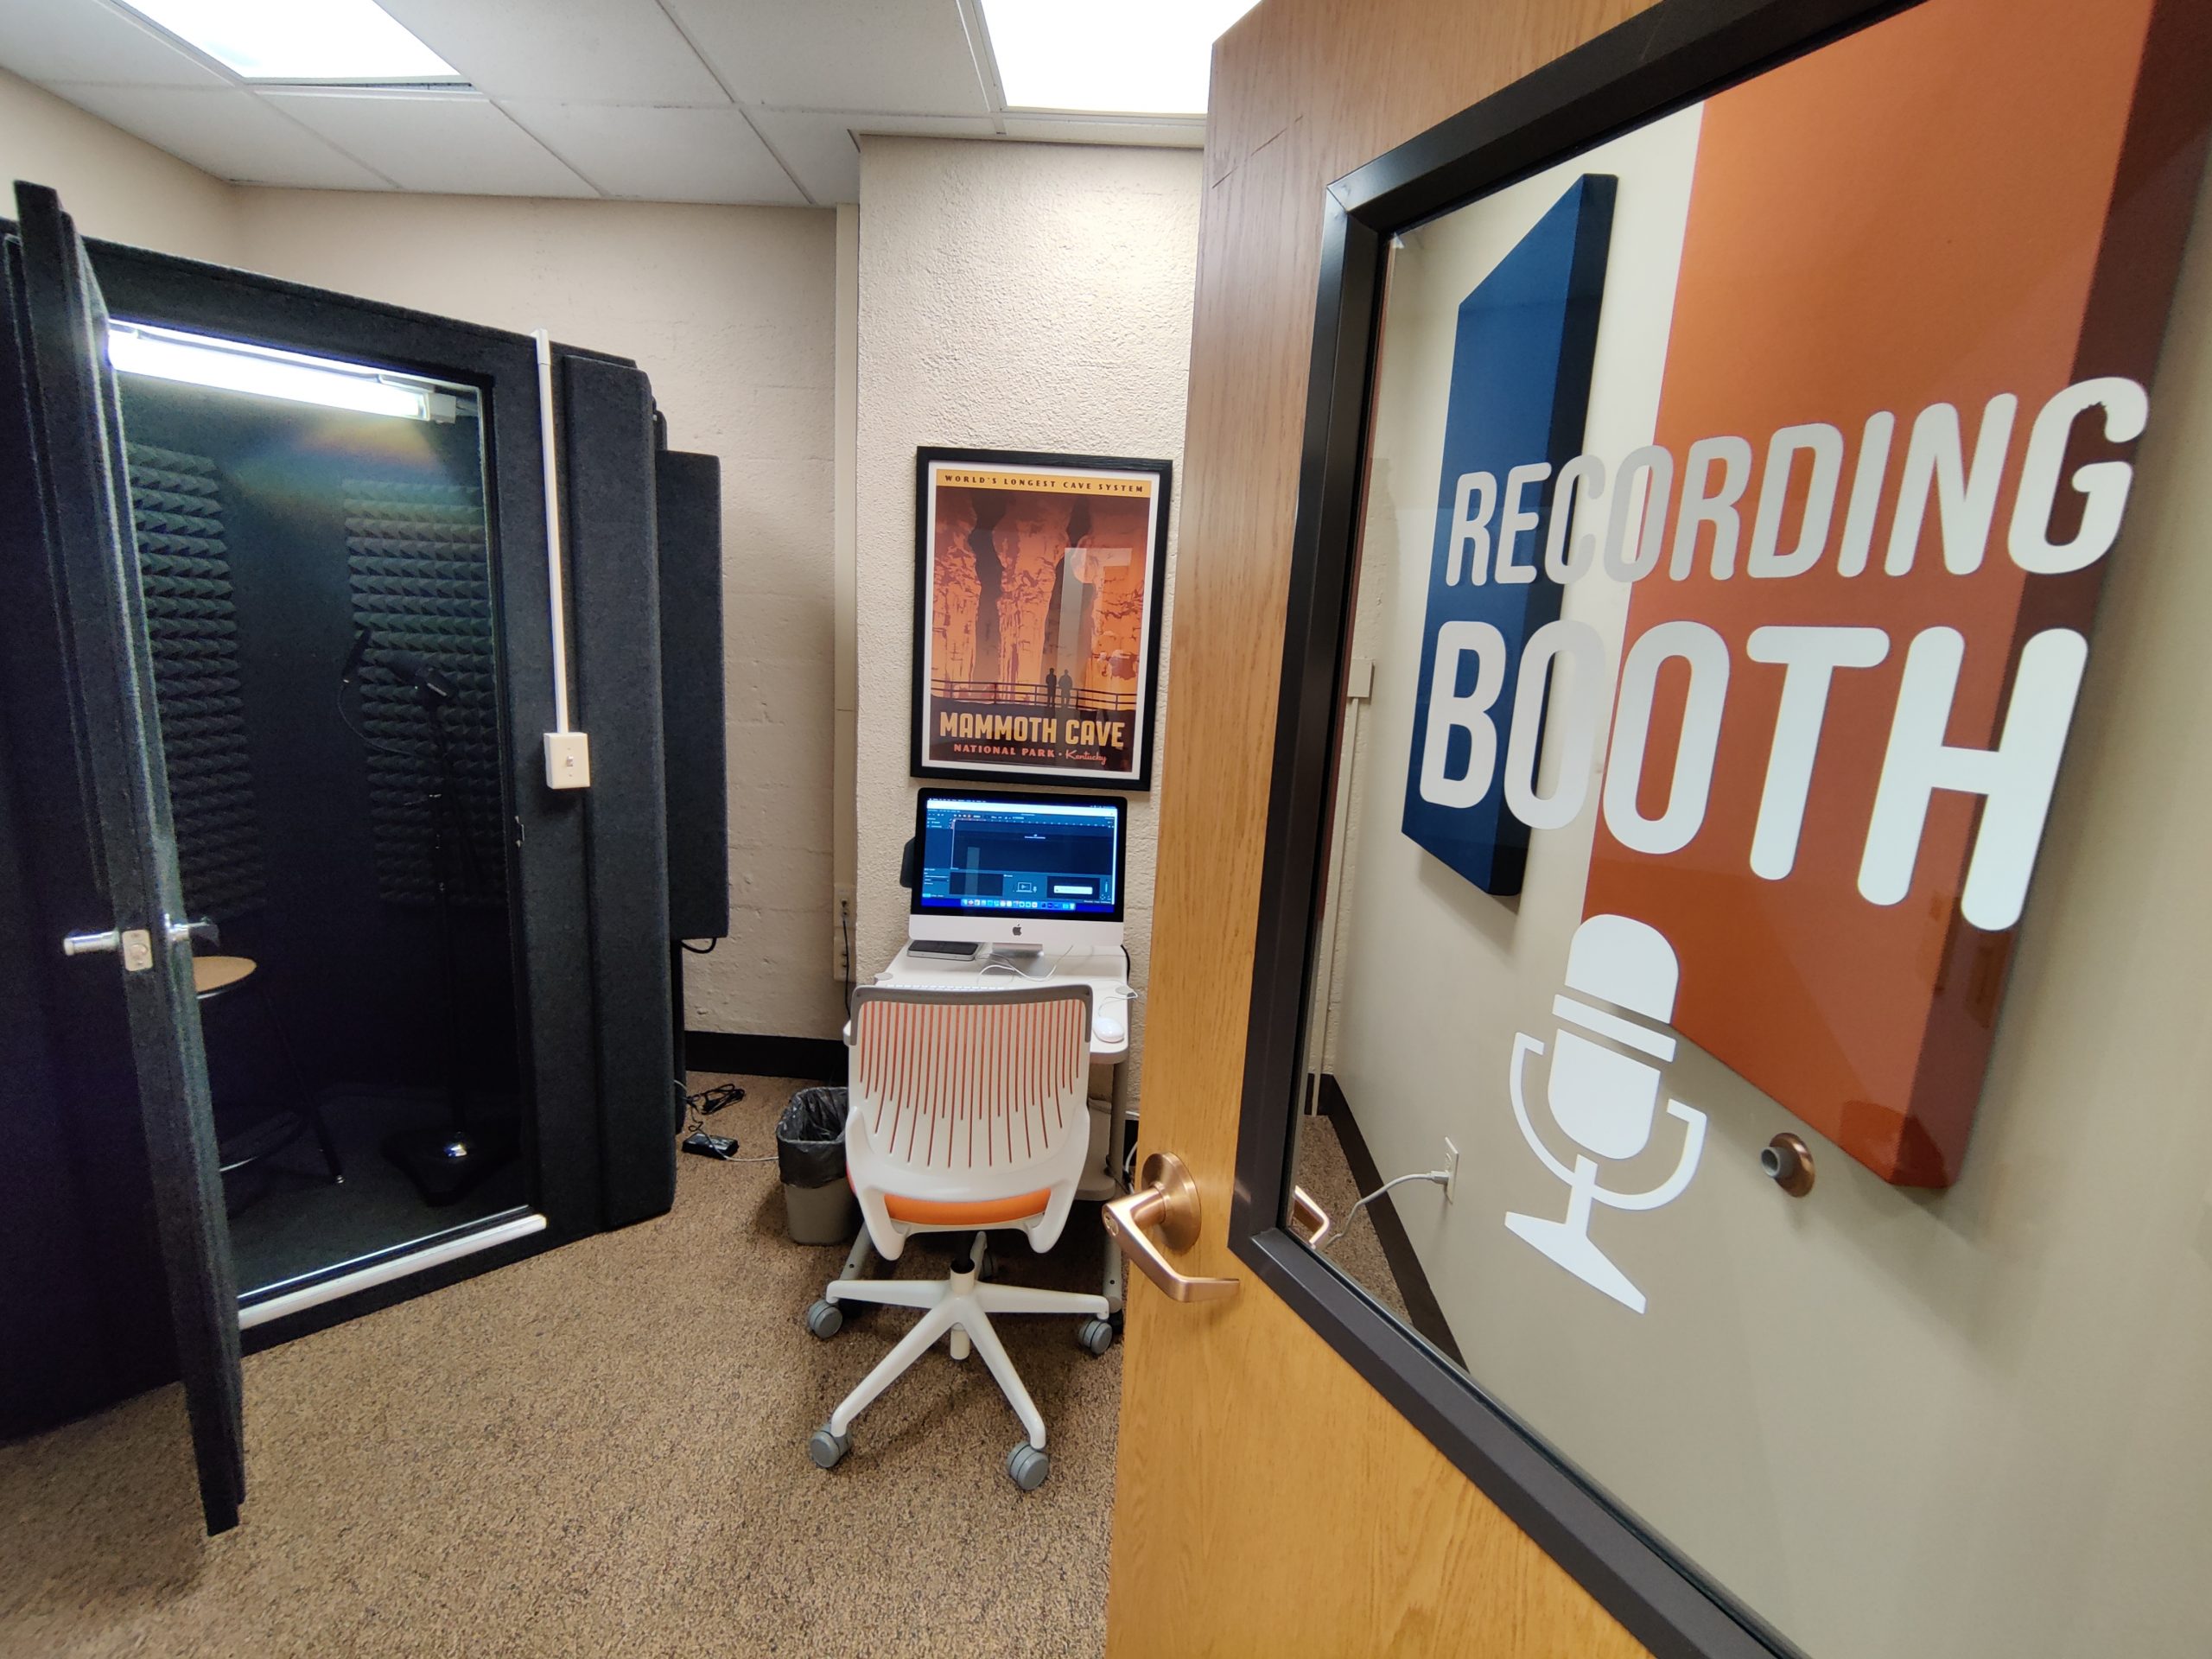 The interior of the Recording Booth room, showing a small room with no windows containing a table, rolling chair, a Mac, and a full recording booth.